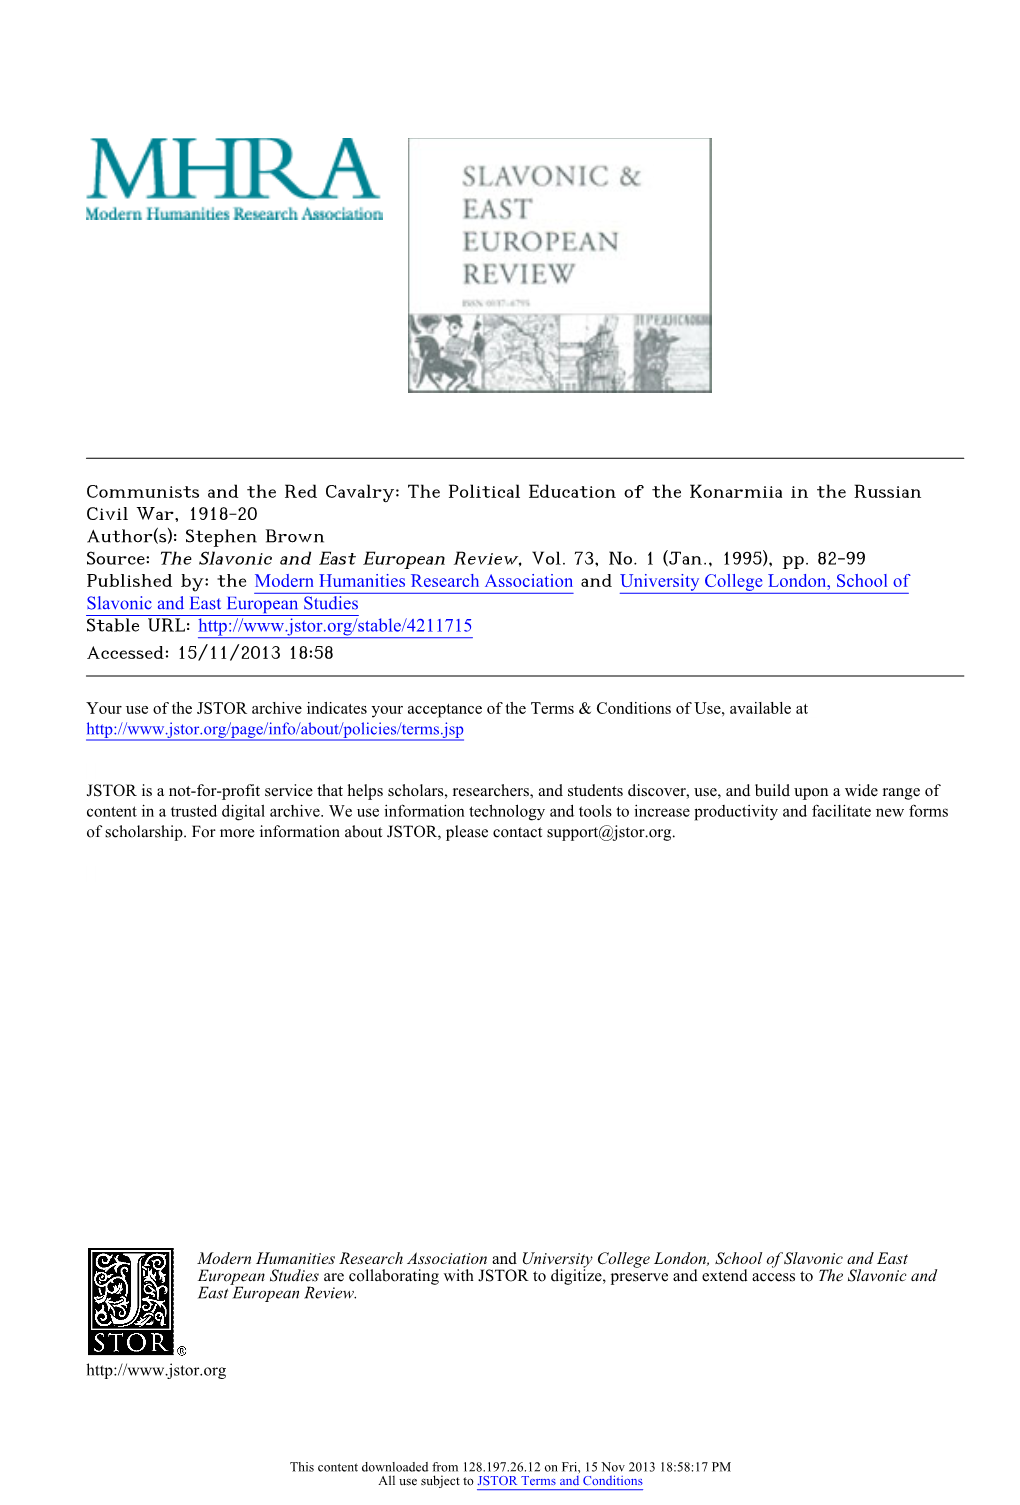 Communists and the Red Cavalry: the Political Education of the Konarmiia in the Russian Civil War, 1918-20